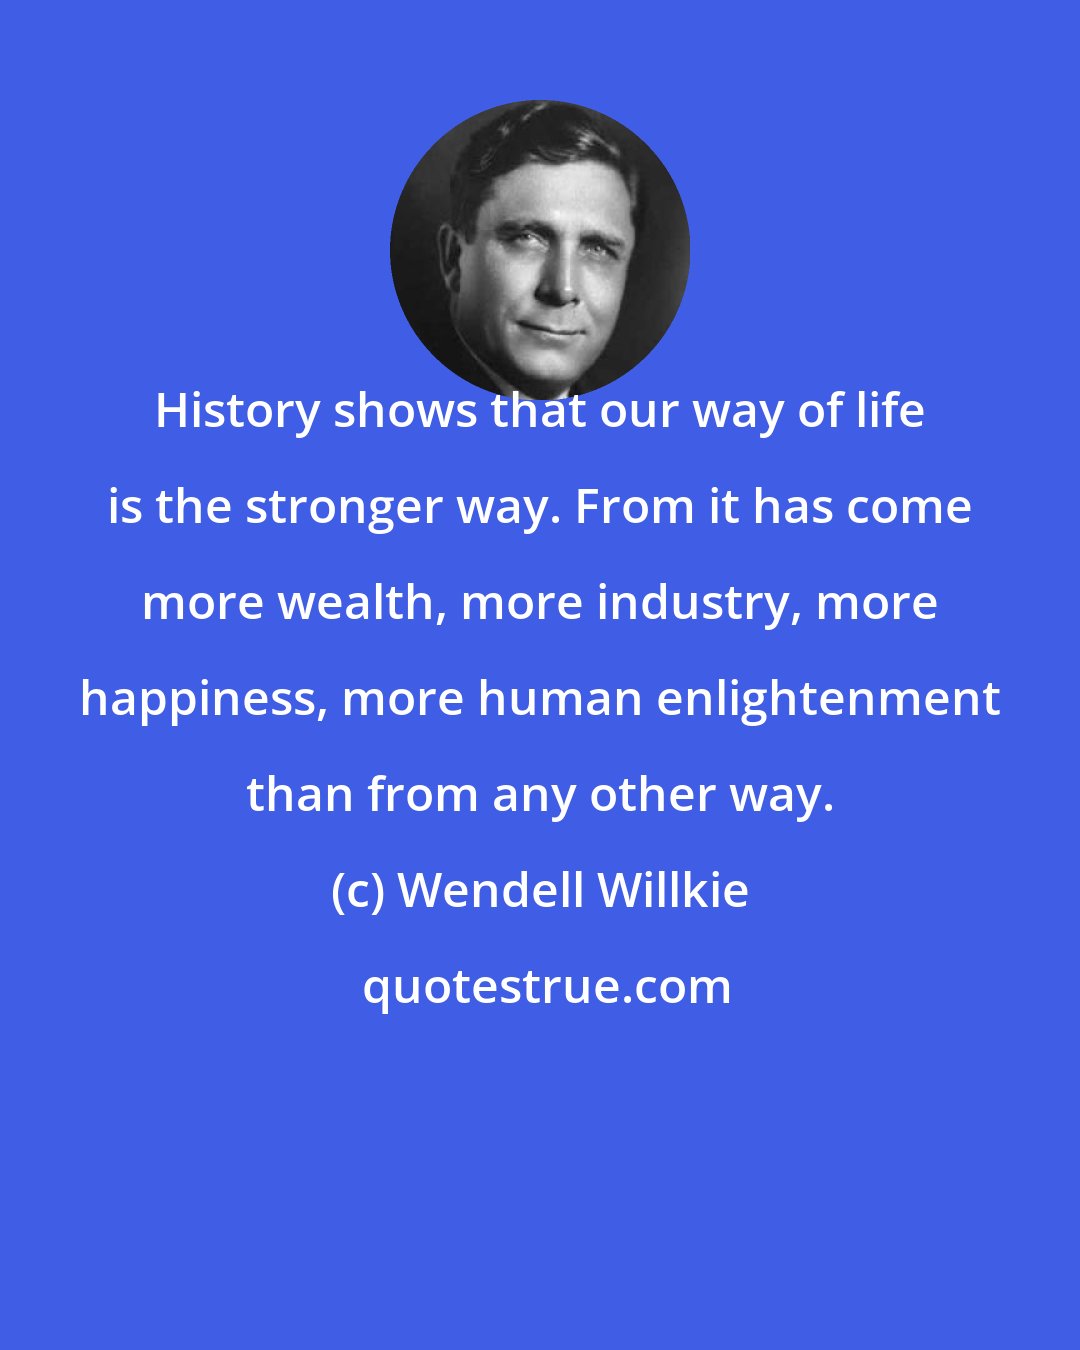 Wendell Willkie: History shows that our way of life is the stronger way. From it has come more wealth, more industry, more happiness, more human enlightenment than from any other way.